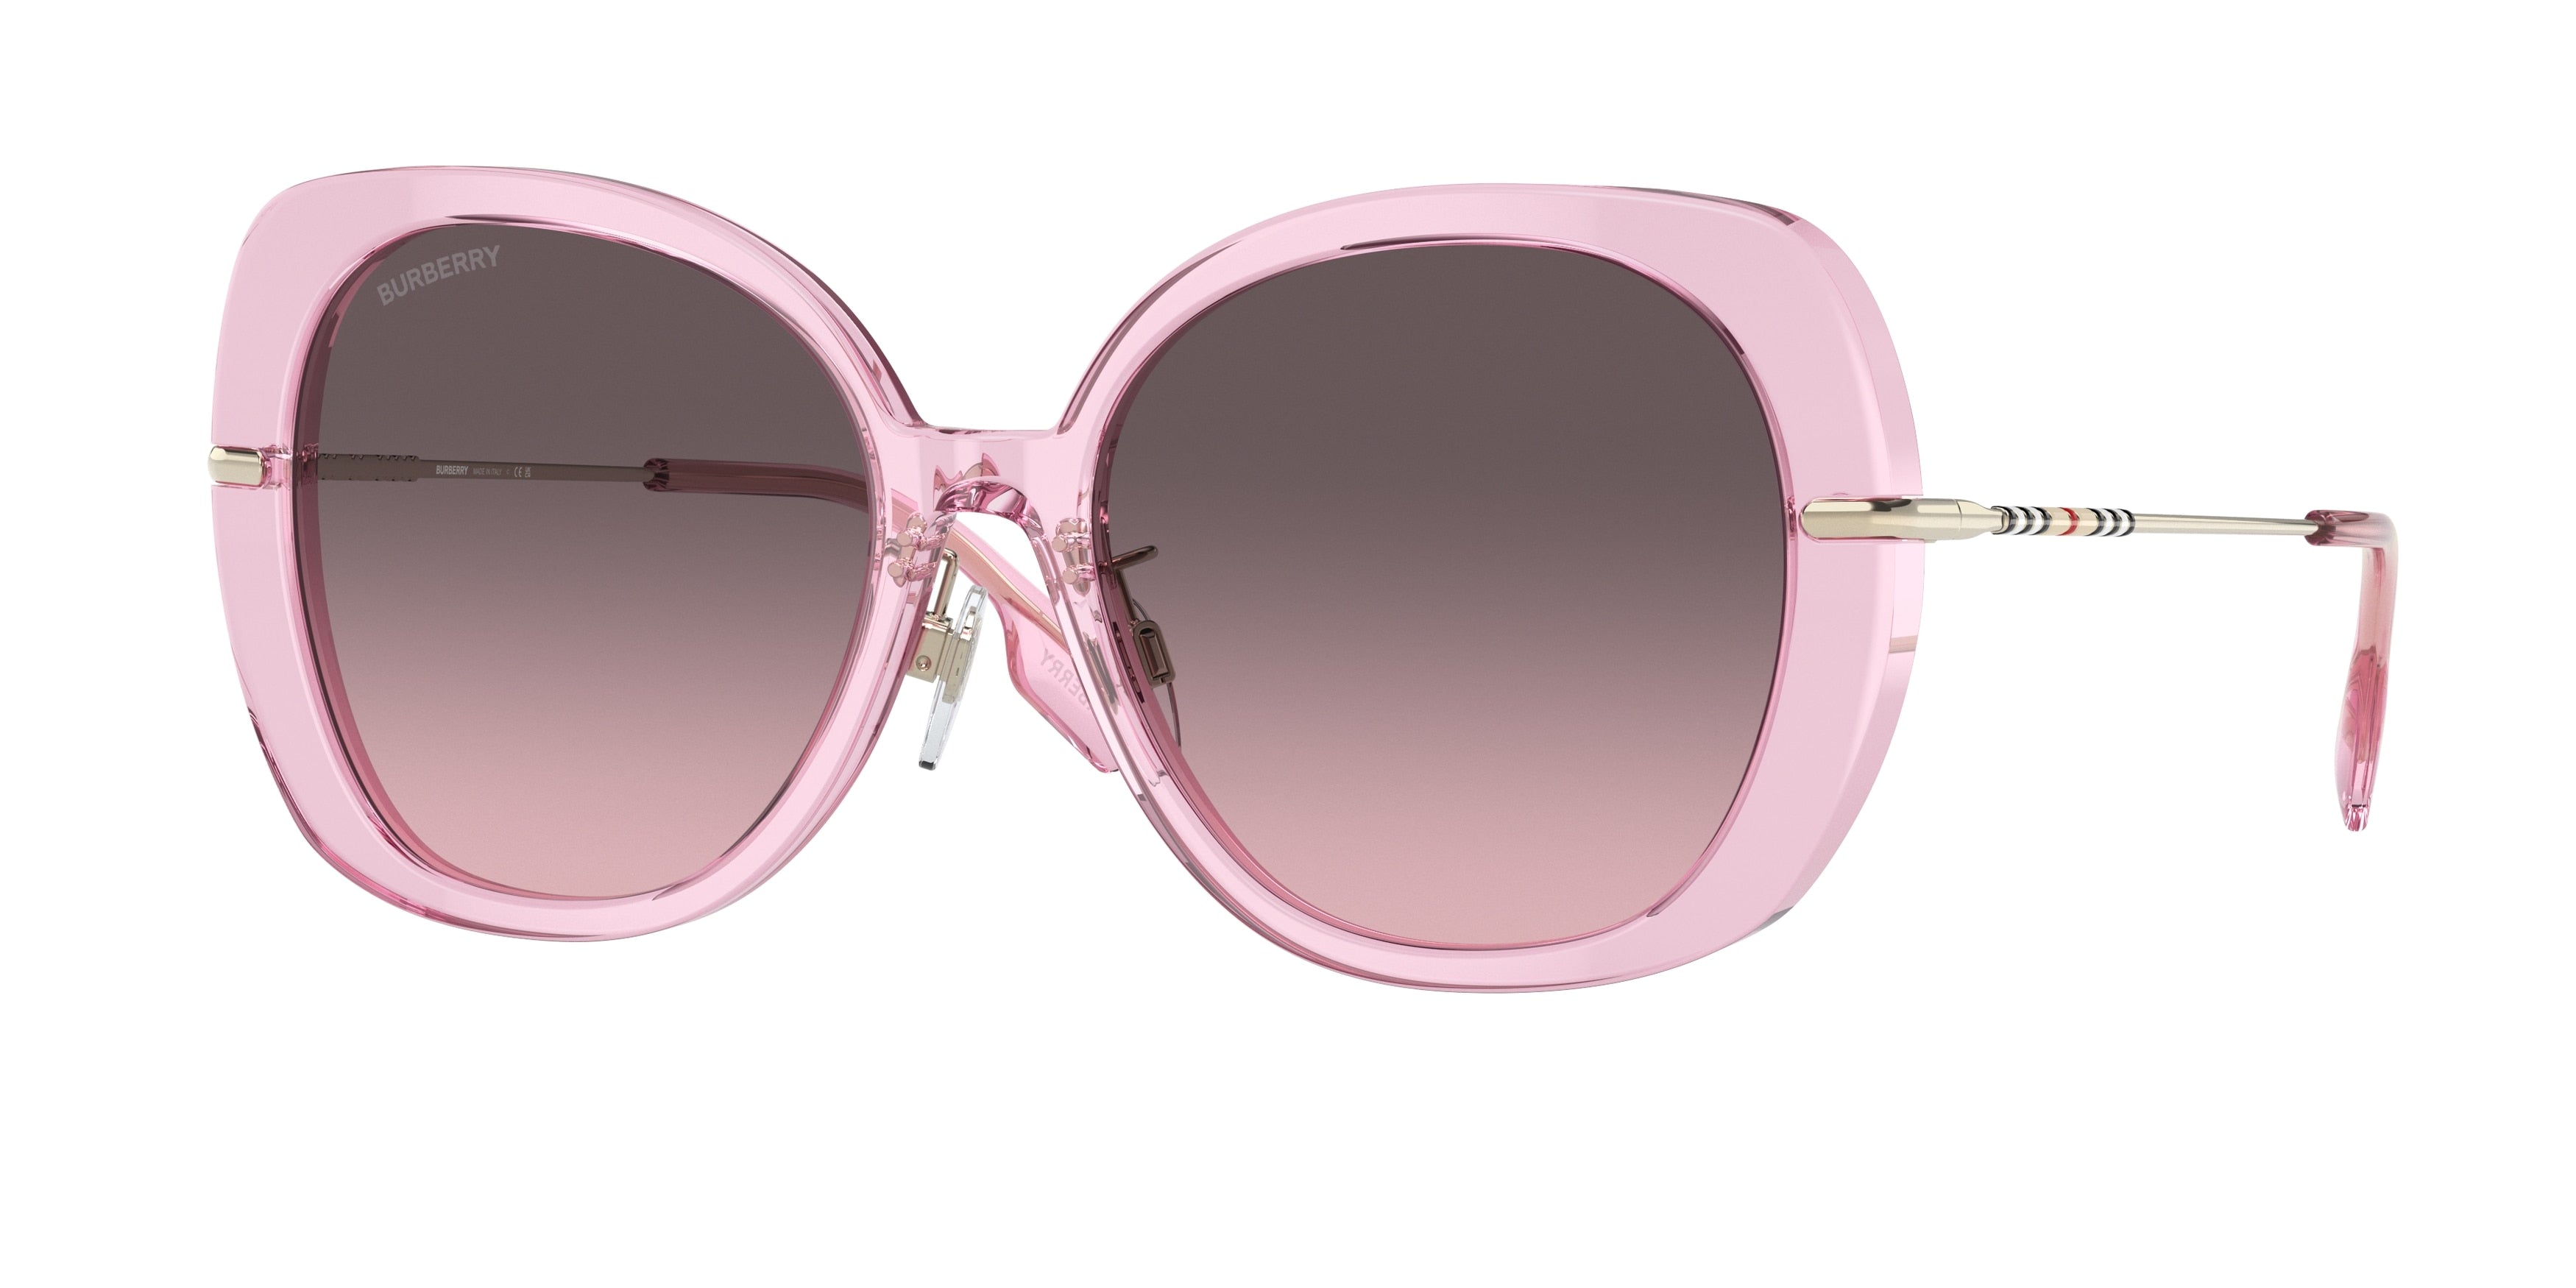 Burberry EUGENIE BE4374F Square Sunglasses  40245M-Pink 55-140-17 - Color Map Pink